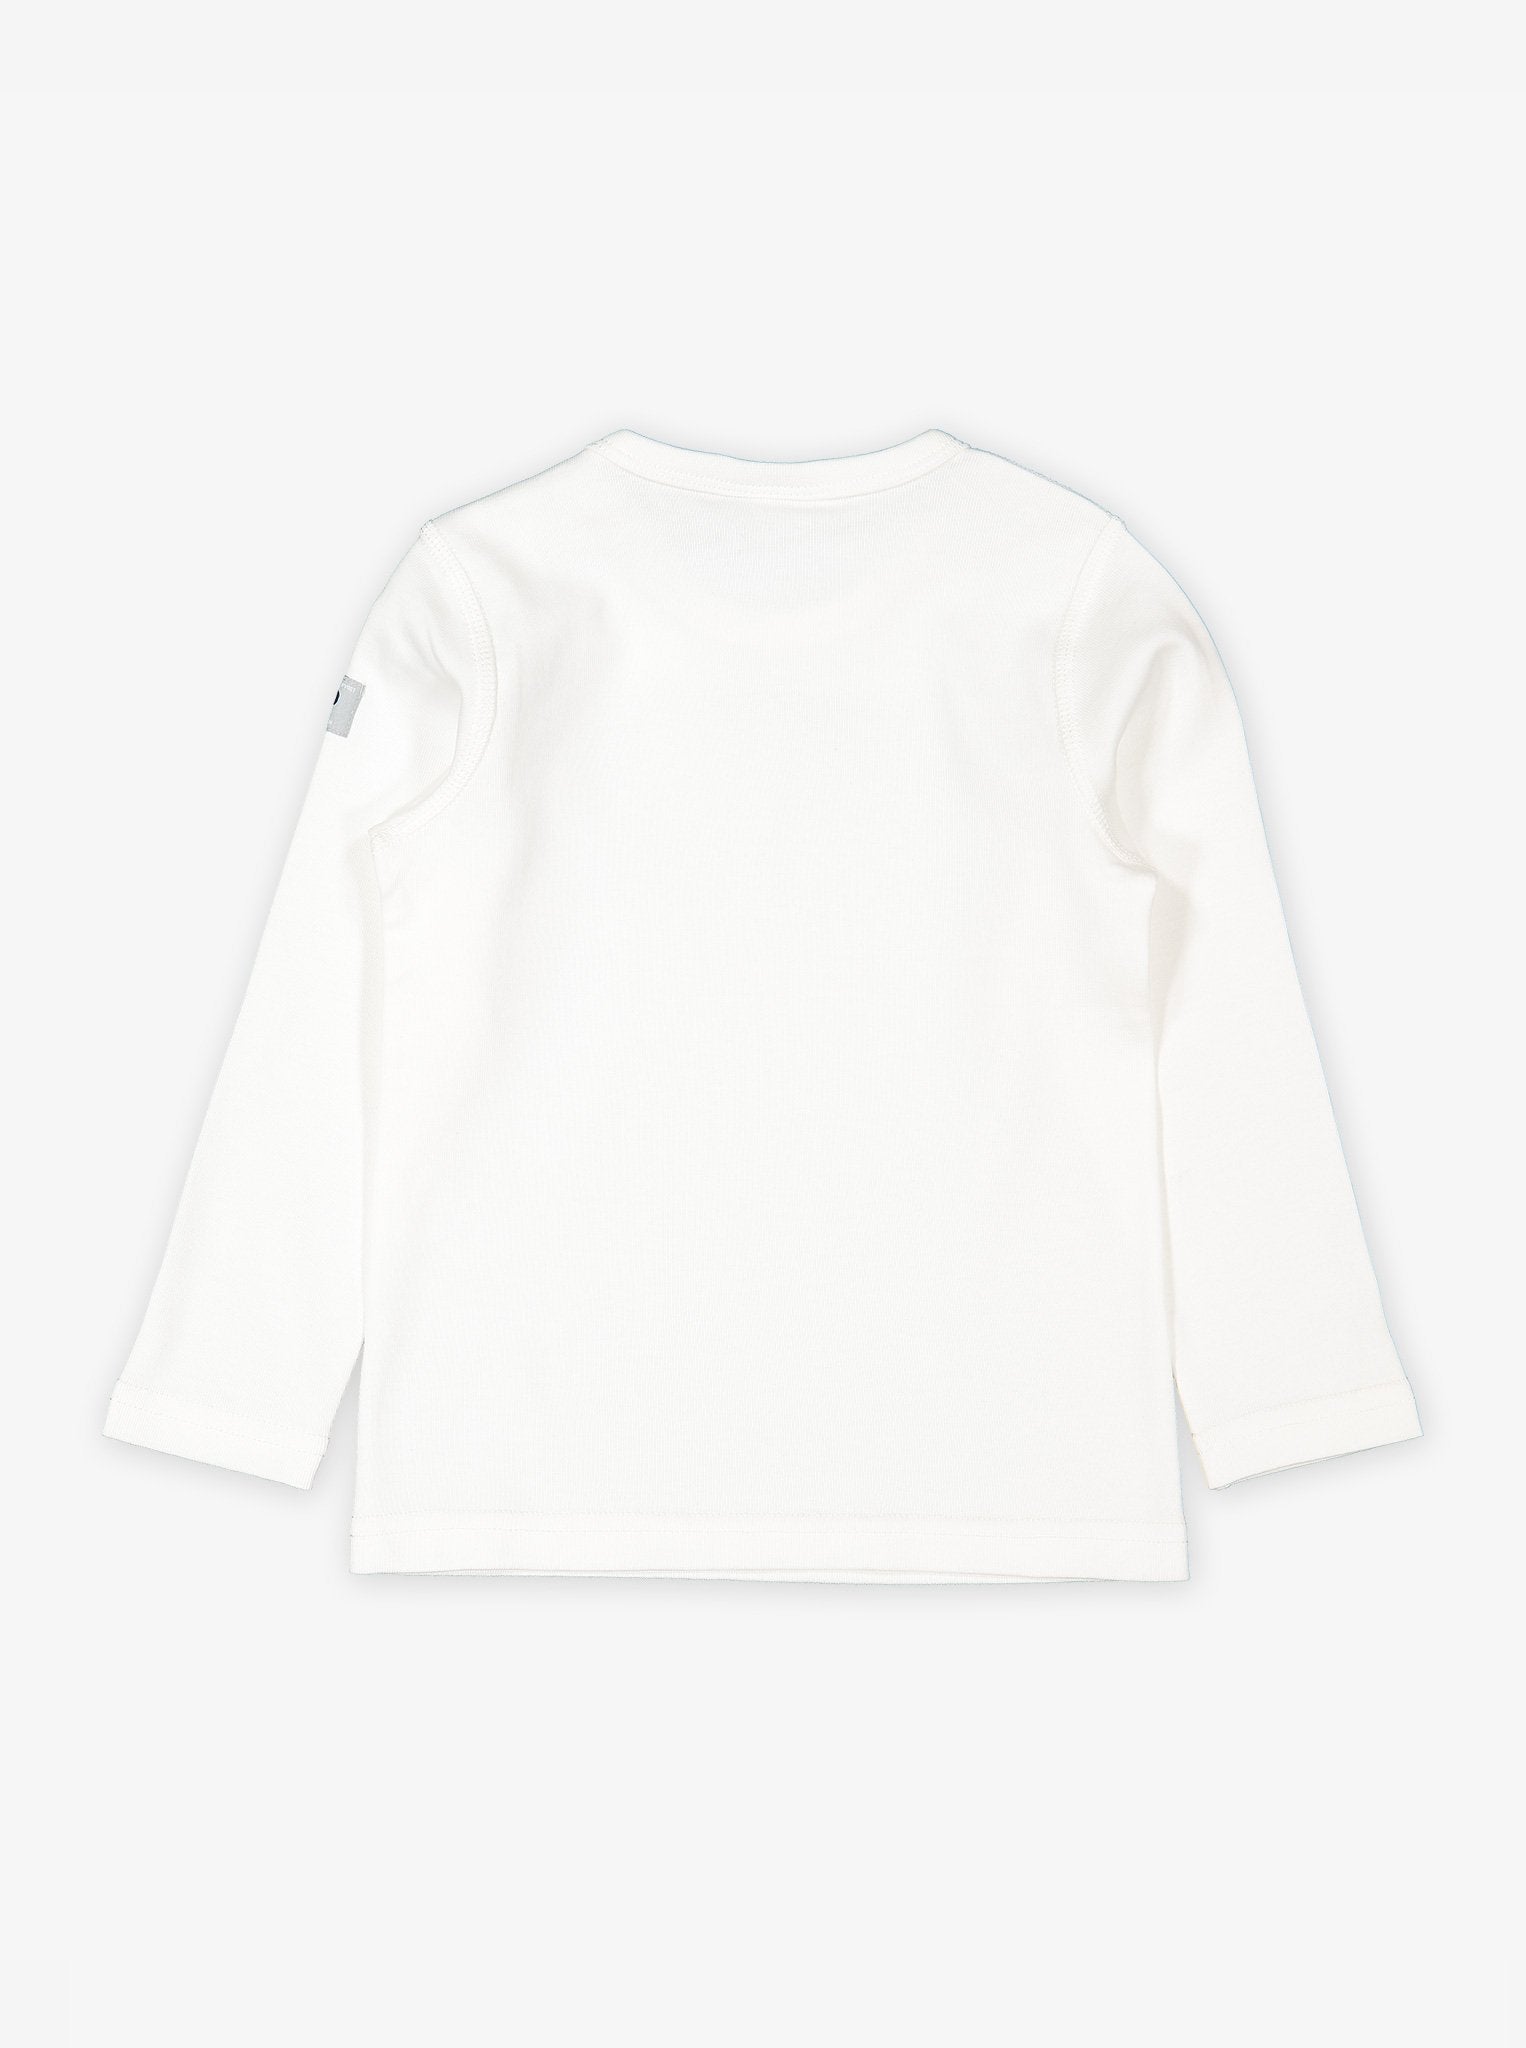 white classic kids top, ethical organic cotton, polarn o. pyret quality